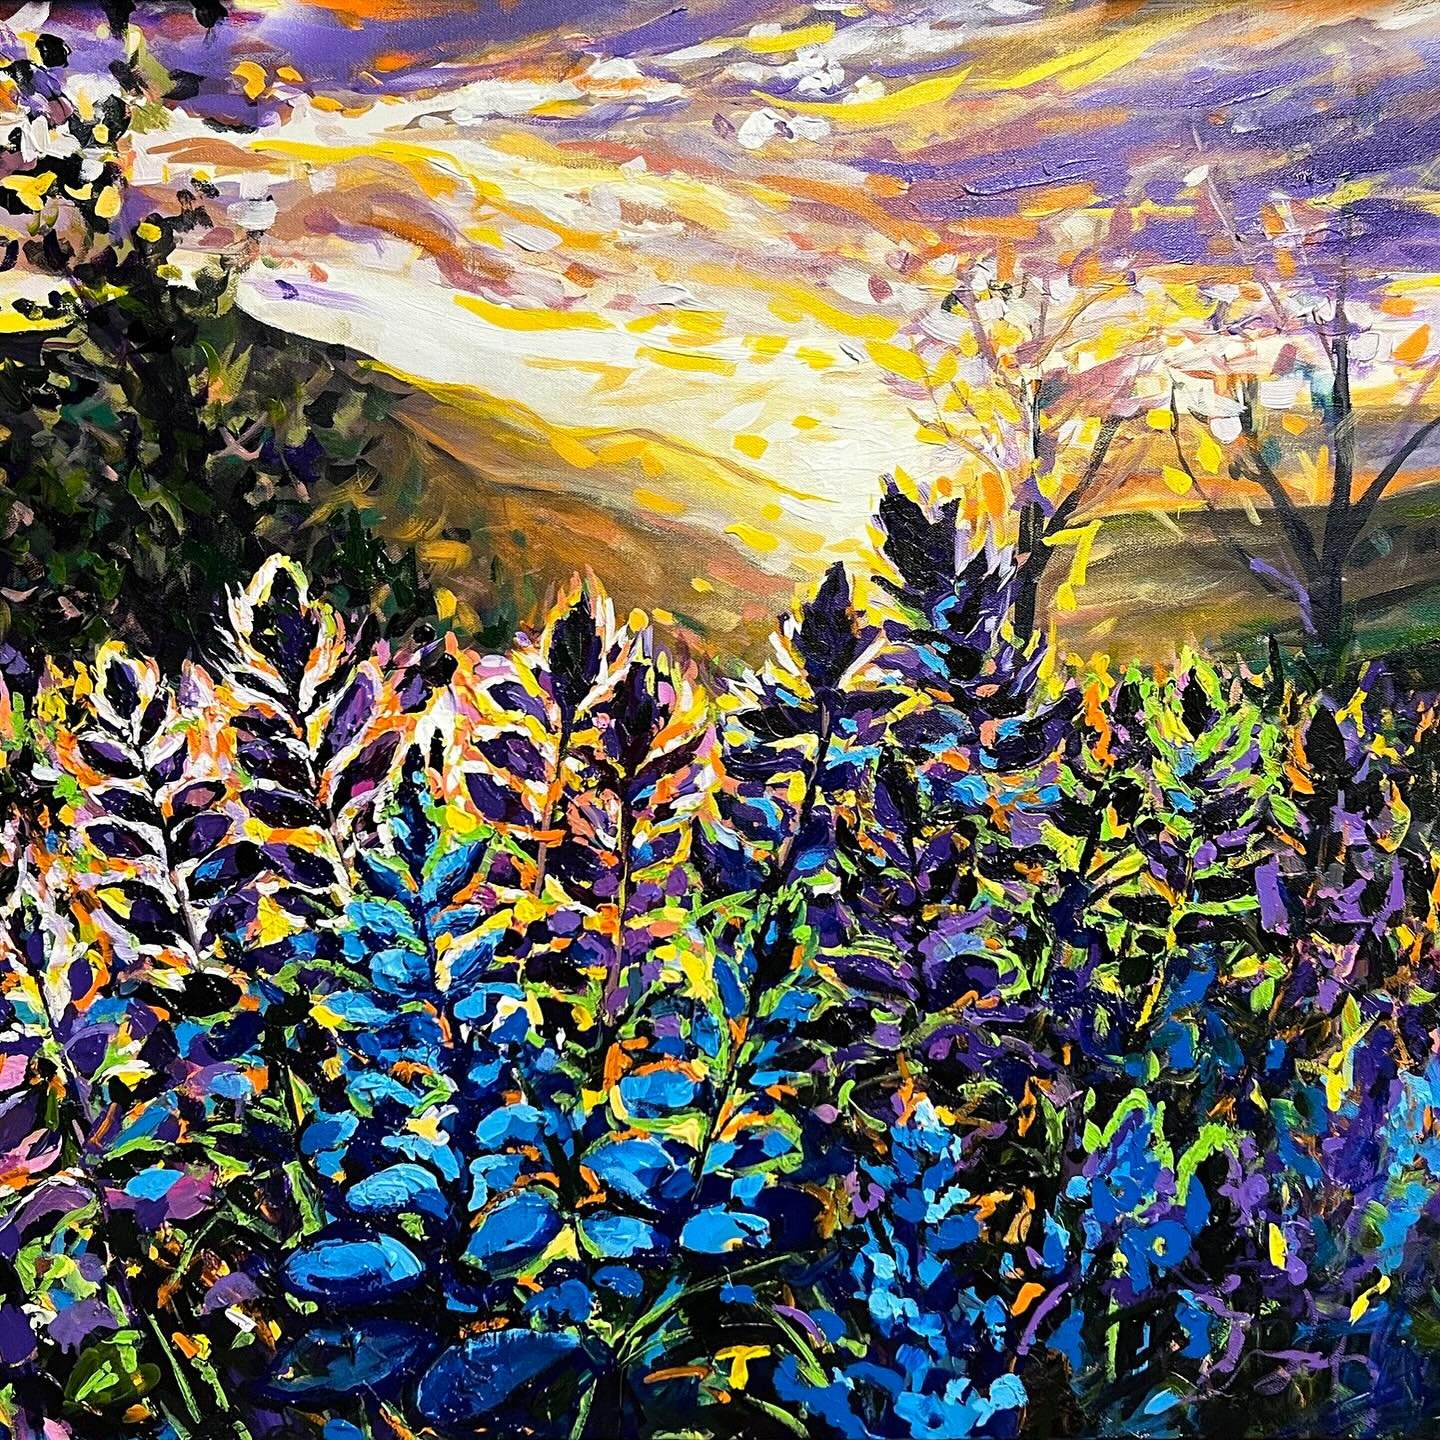 Available Art Feature ☀️🧡 Lupine Daydream 🧡☀️
48X30&rdquo; acrylic on canvas - visit my bio link to purchase 

Rolling hills of Colorado wildflowers are backlit by a vibrant sunset in this positive composition. This painting is a current favorite o